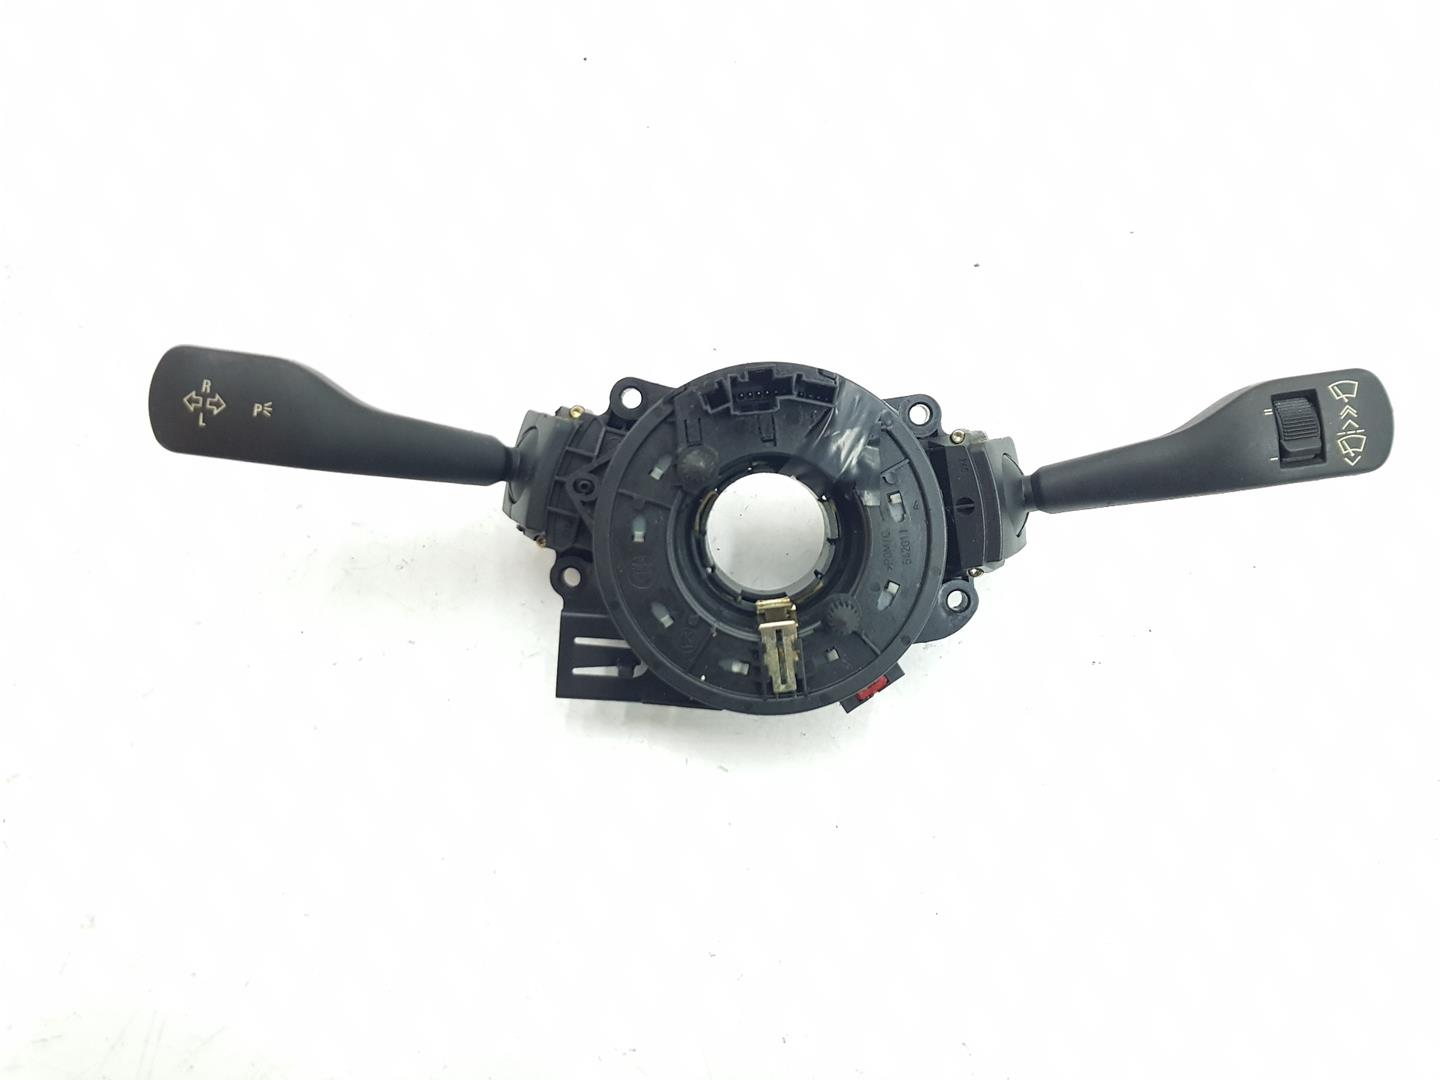 BMW X3 E83 (2003-2010) Steering wheel buttons / switches 61318379091, 61318377487, 83636698363662 19815773